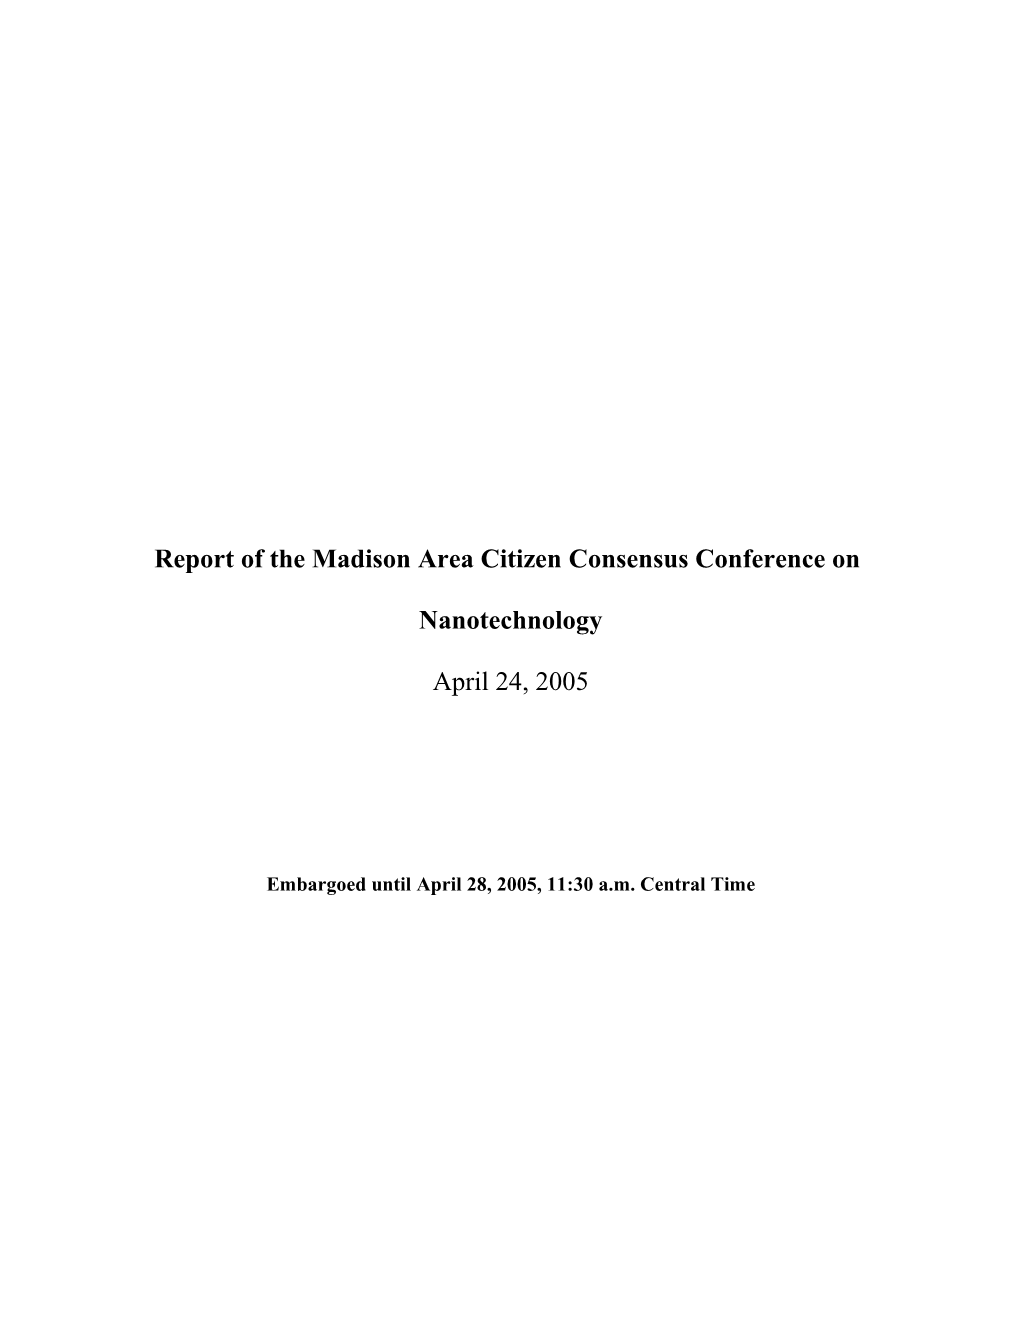 Report of the Madison Area Citizen Consensus Conference on Nanotechnology